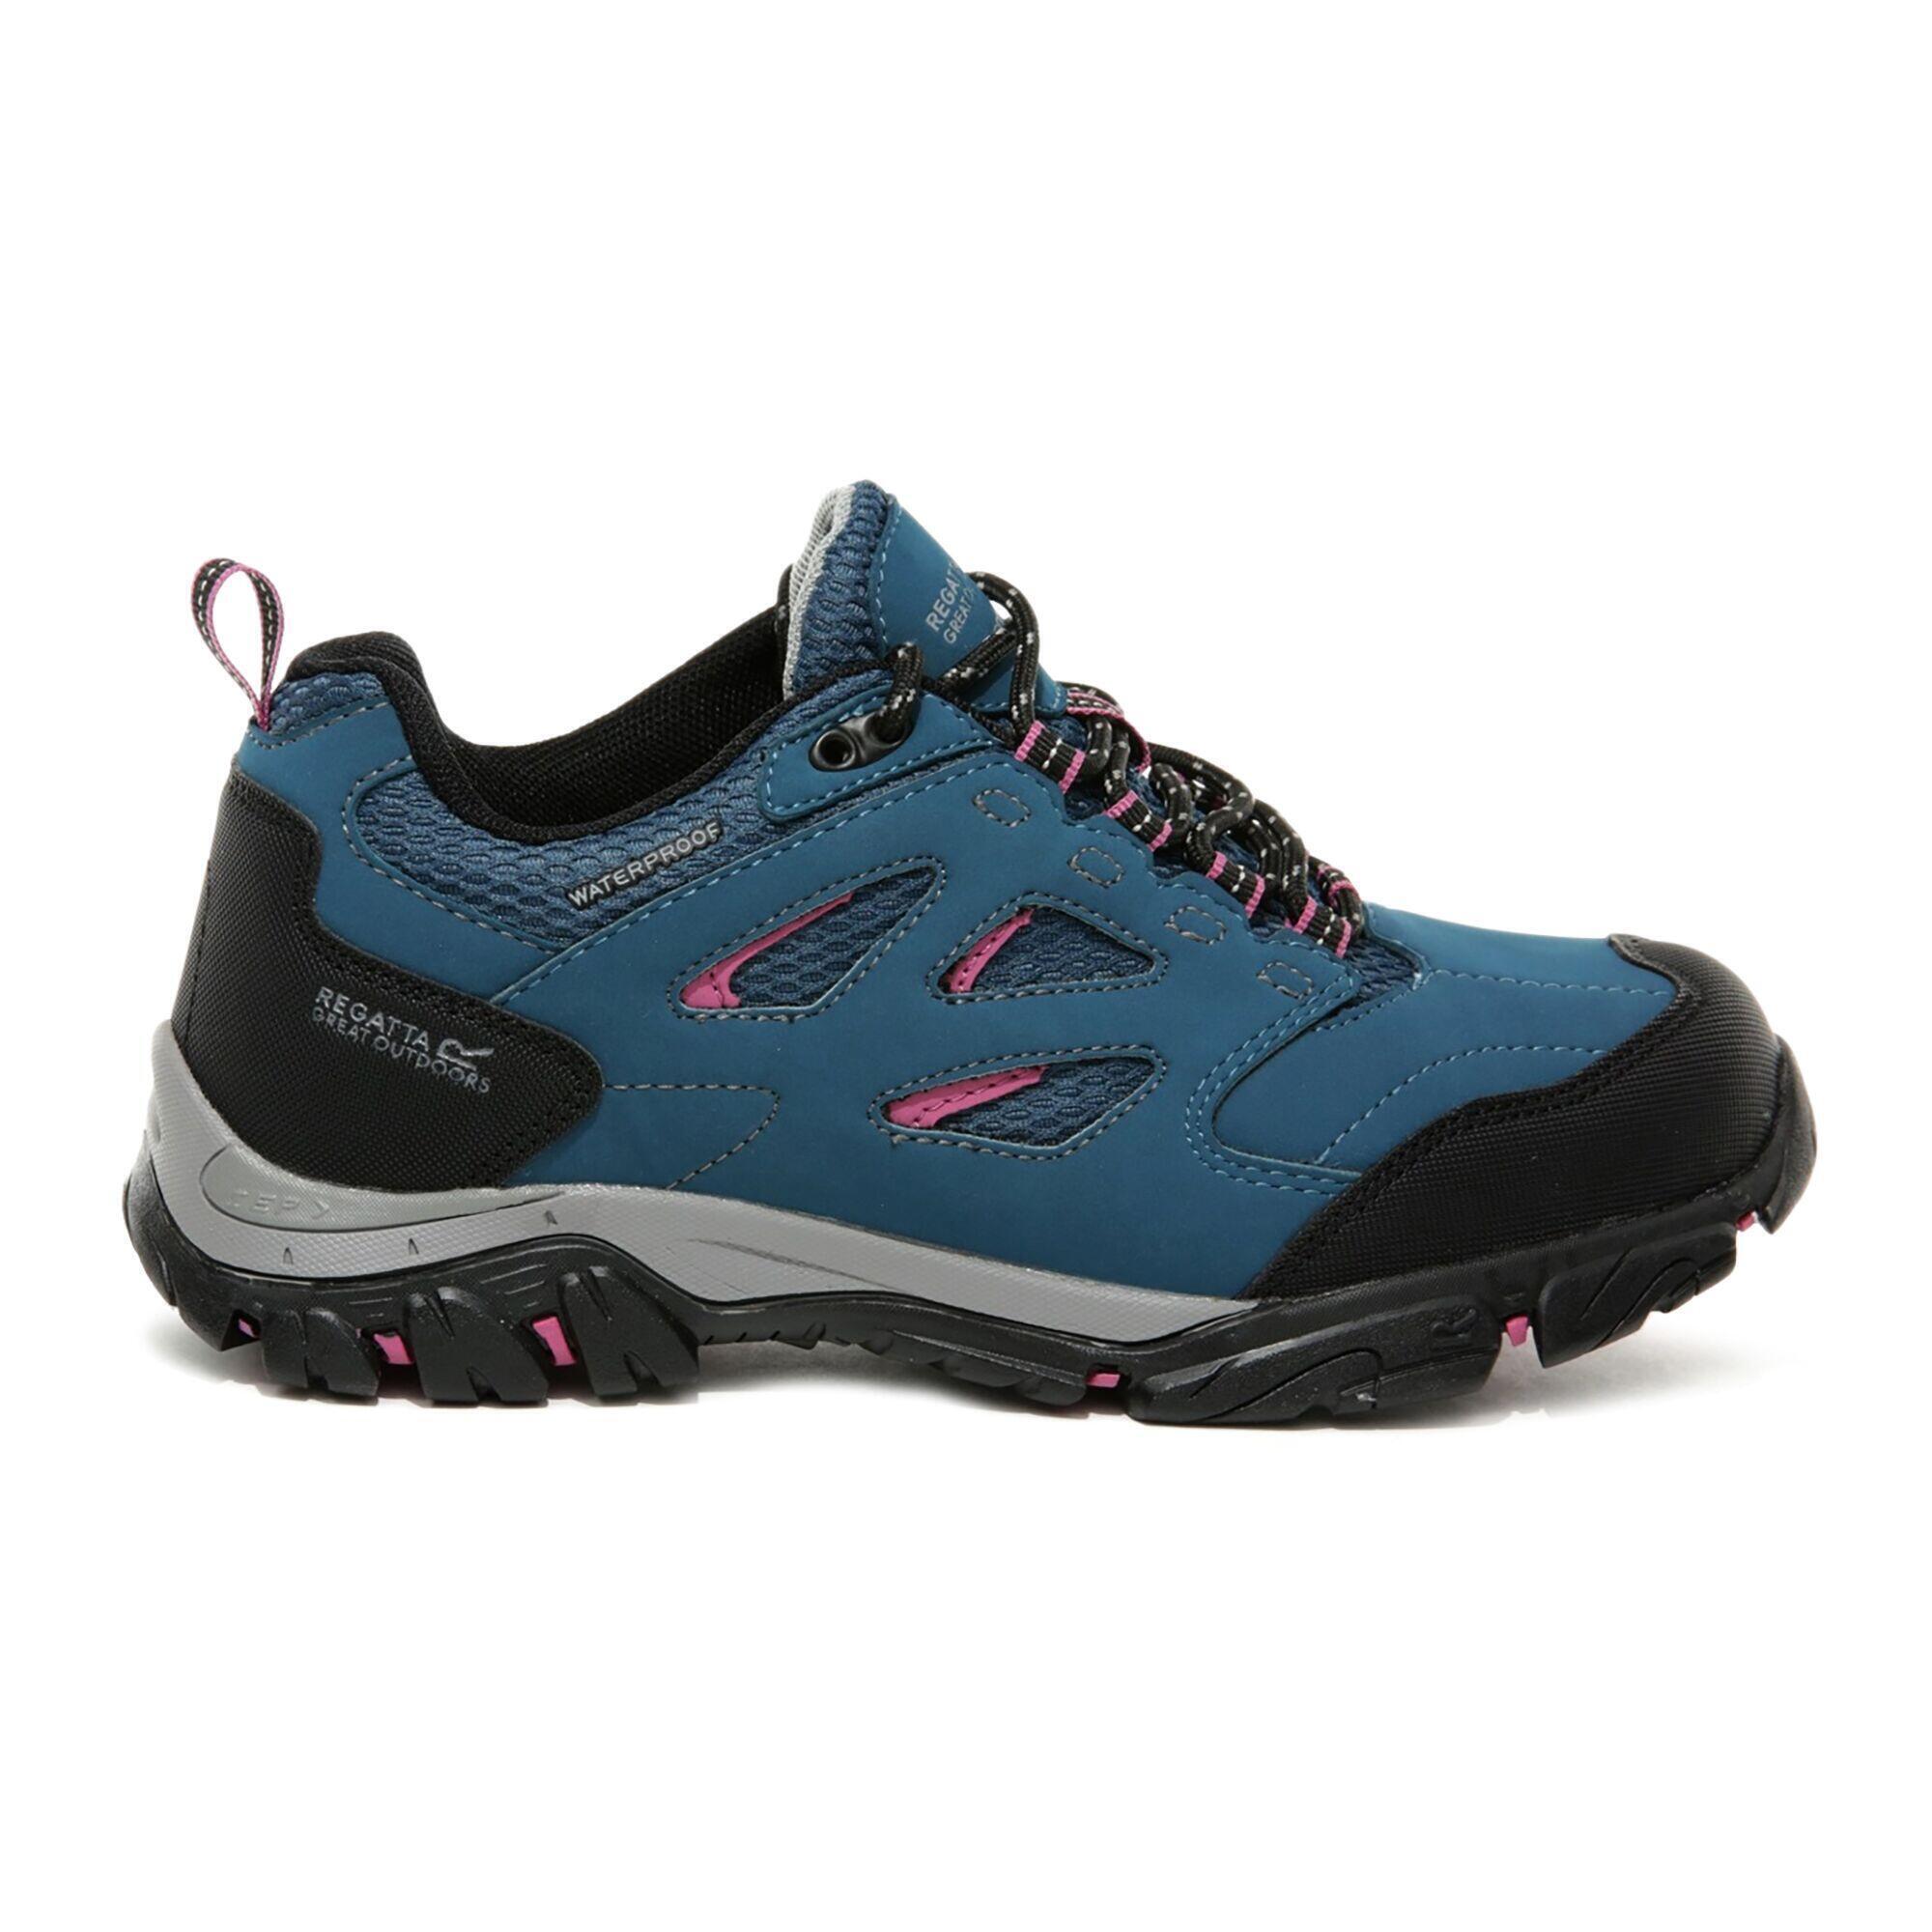 Lady Holcombe IEP Low Women's Hiking Boots - Moroccan Blue / Red 1/5